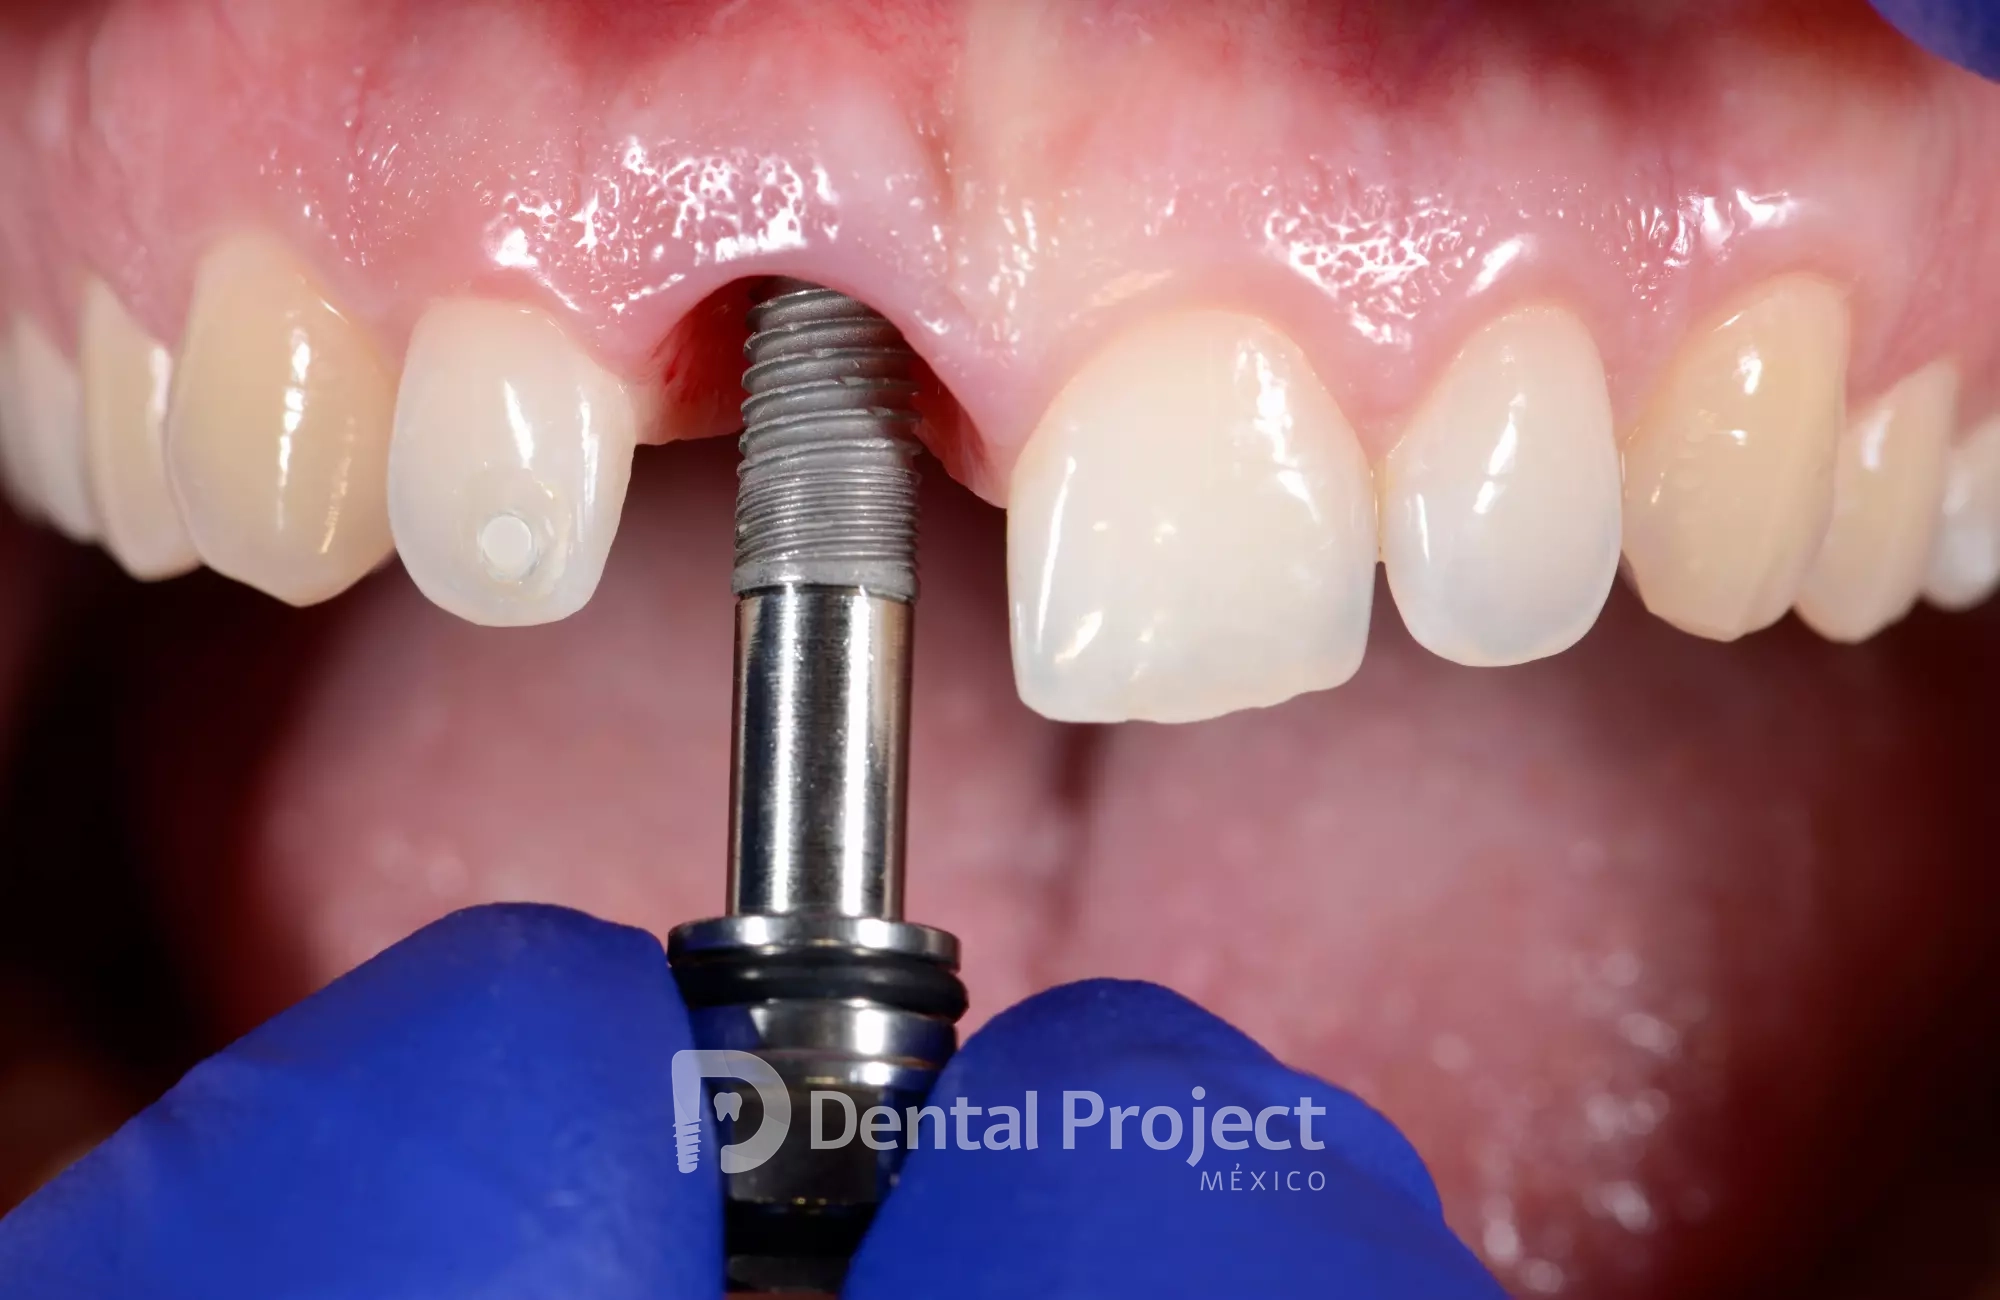 Dental Project Mexico dental implant 1.